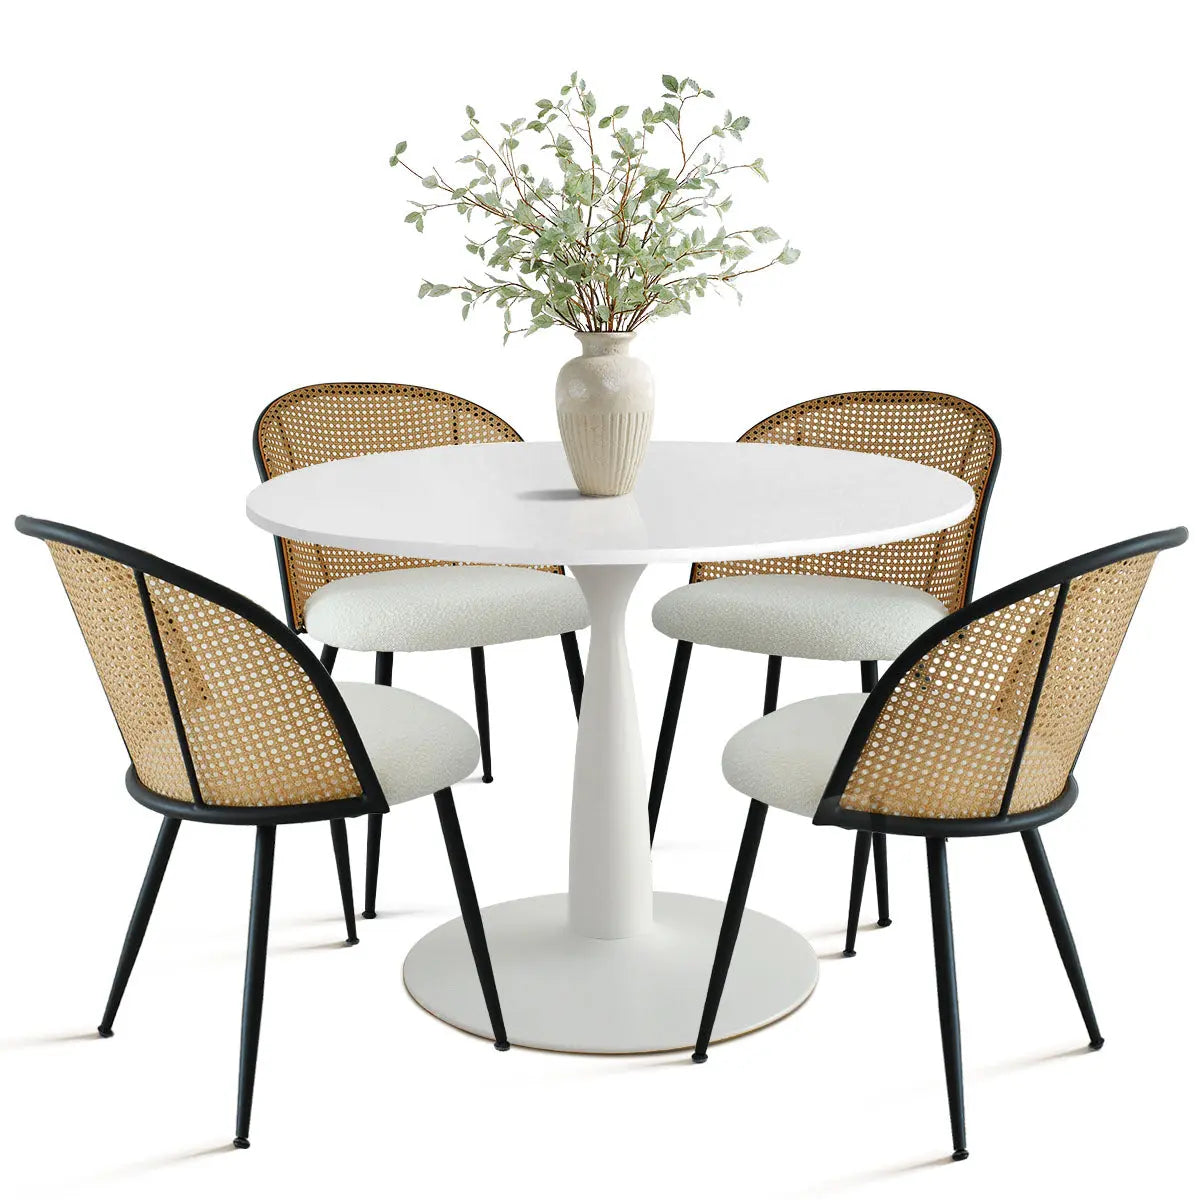 New Haven 35" Round Table & Jules Chair 5pcs Dining Set The Pop Maison